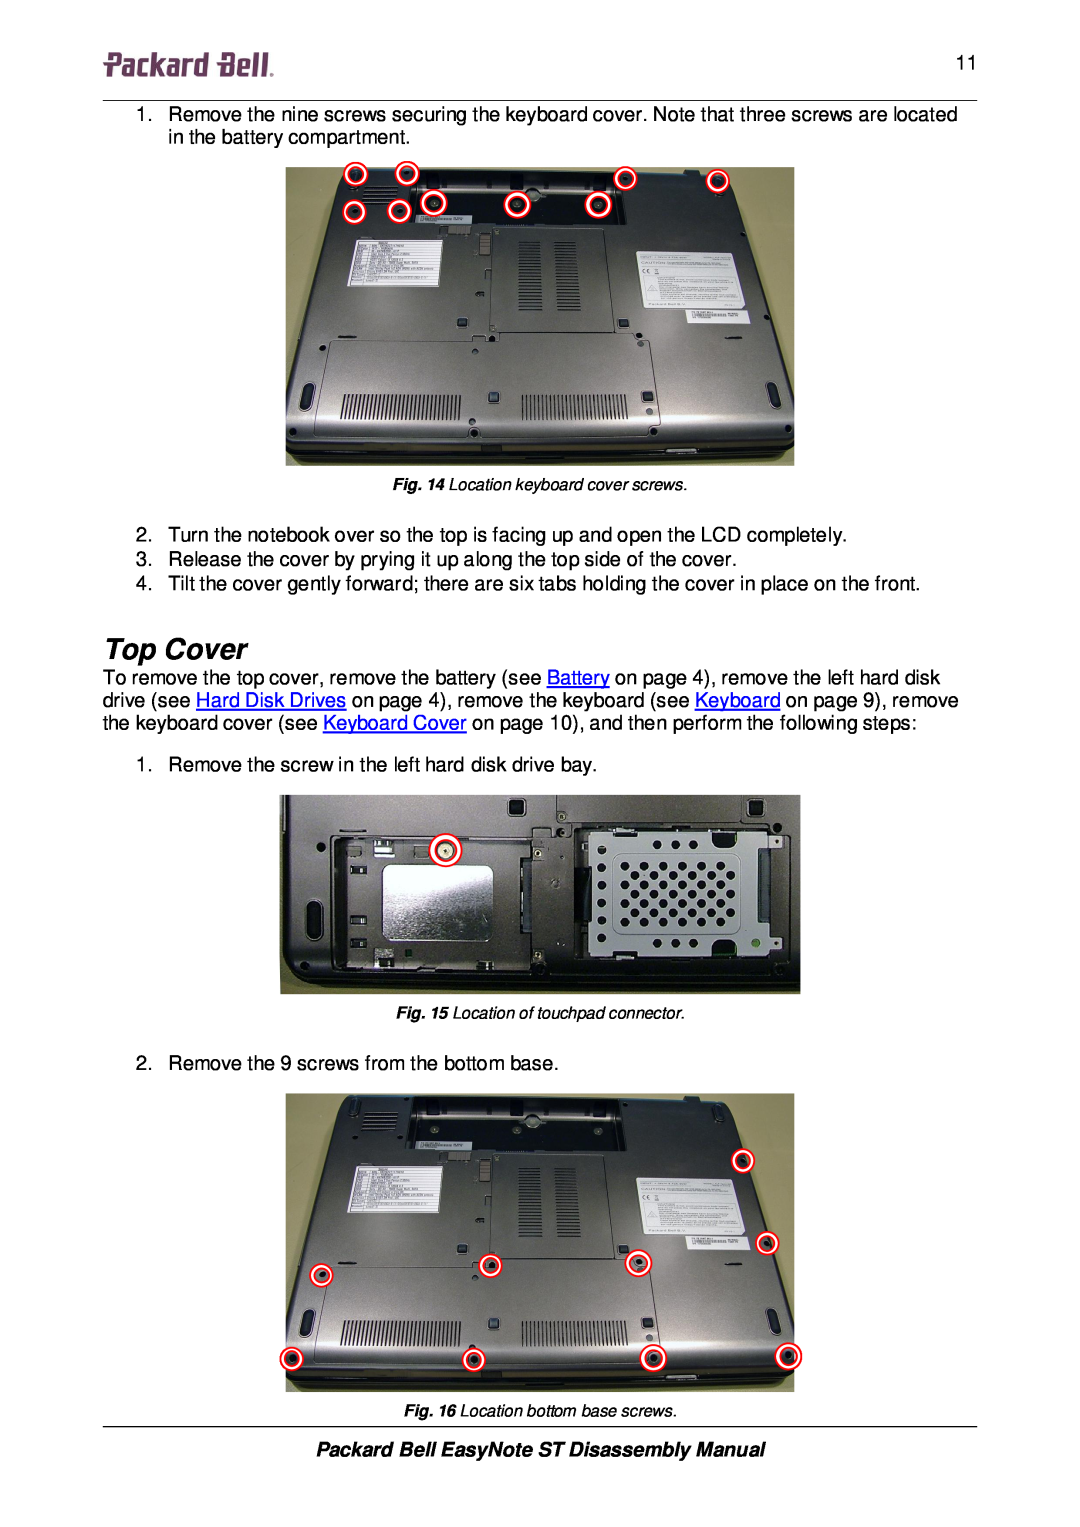 Packard Bell manual Top Cover, Packard Bell EasyNote ST Disassembly Manual 